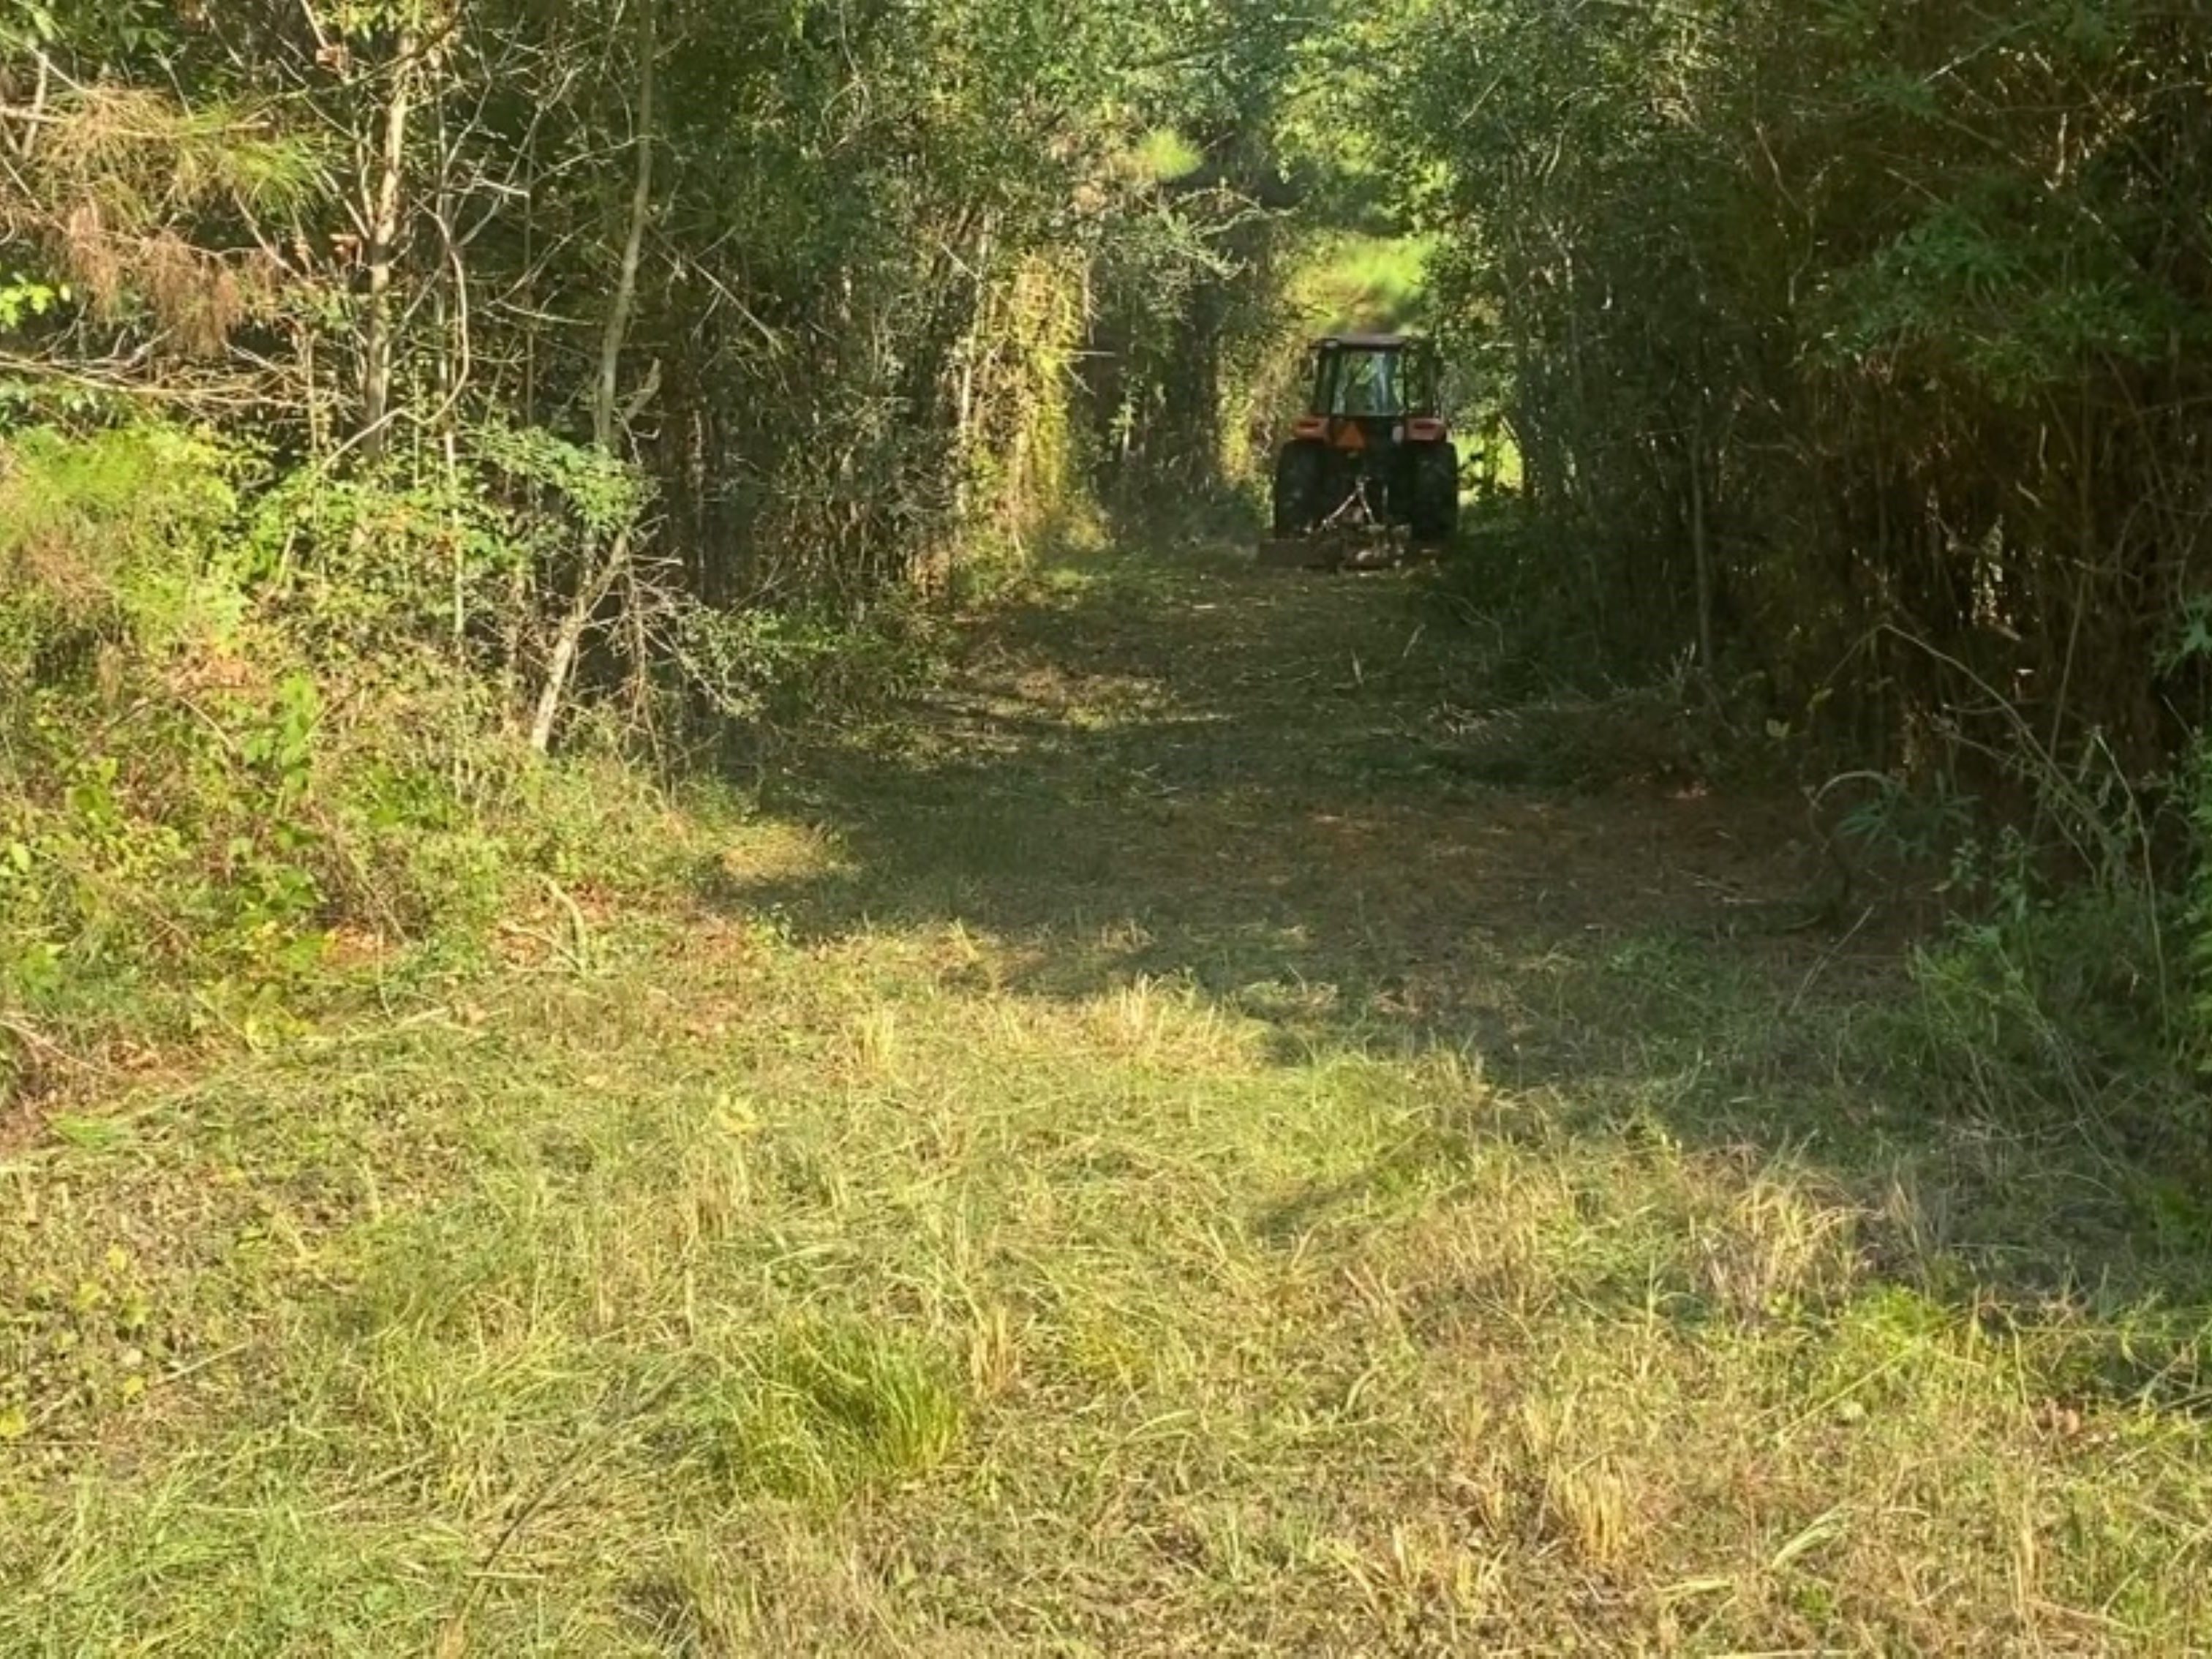 Tractor Work – Shooting Lane and Roadside Trimming